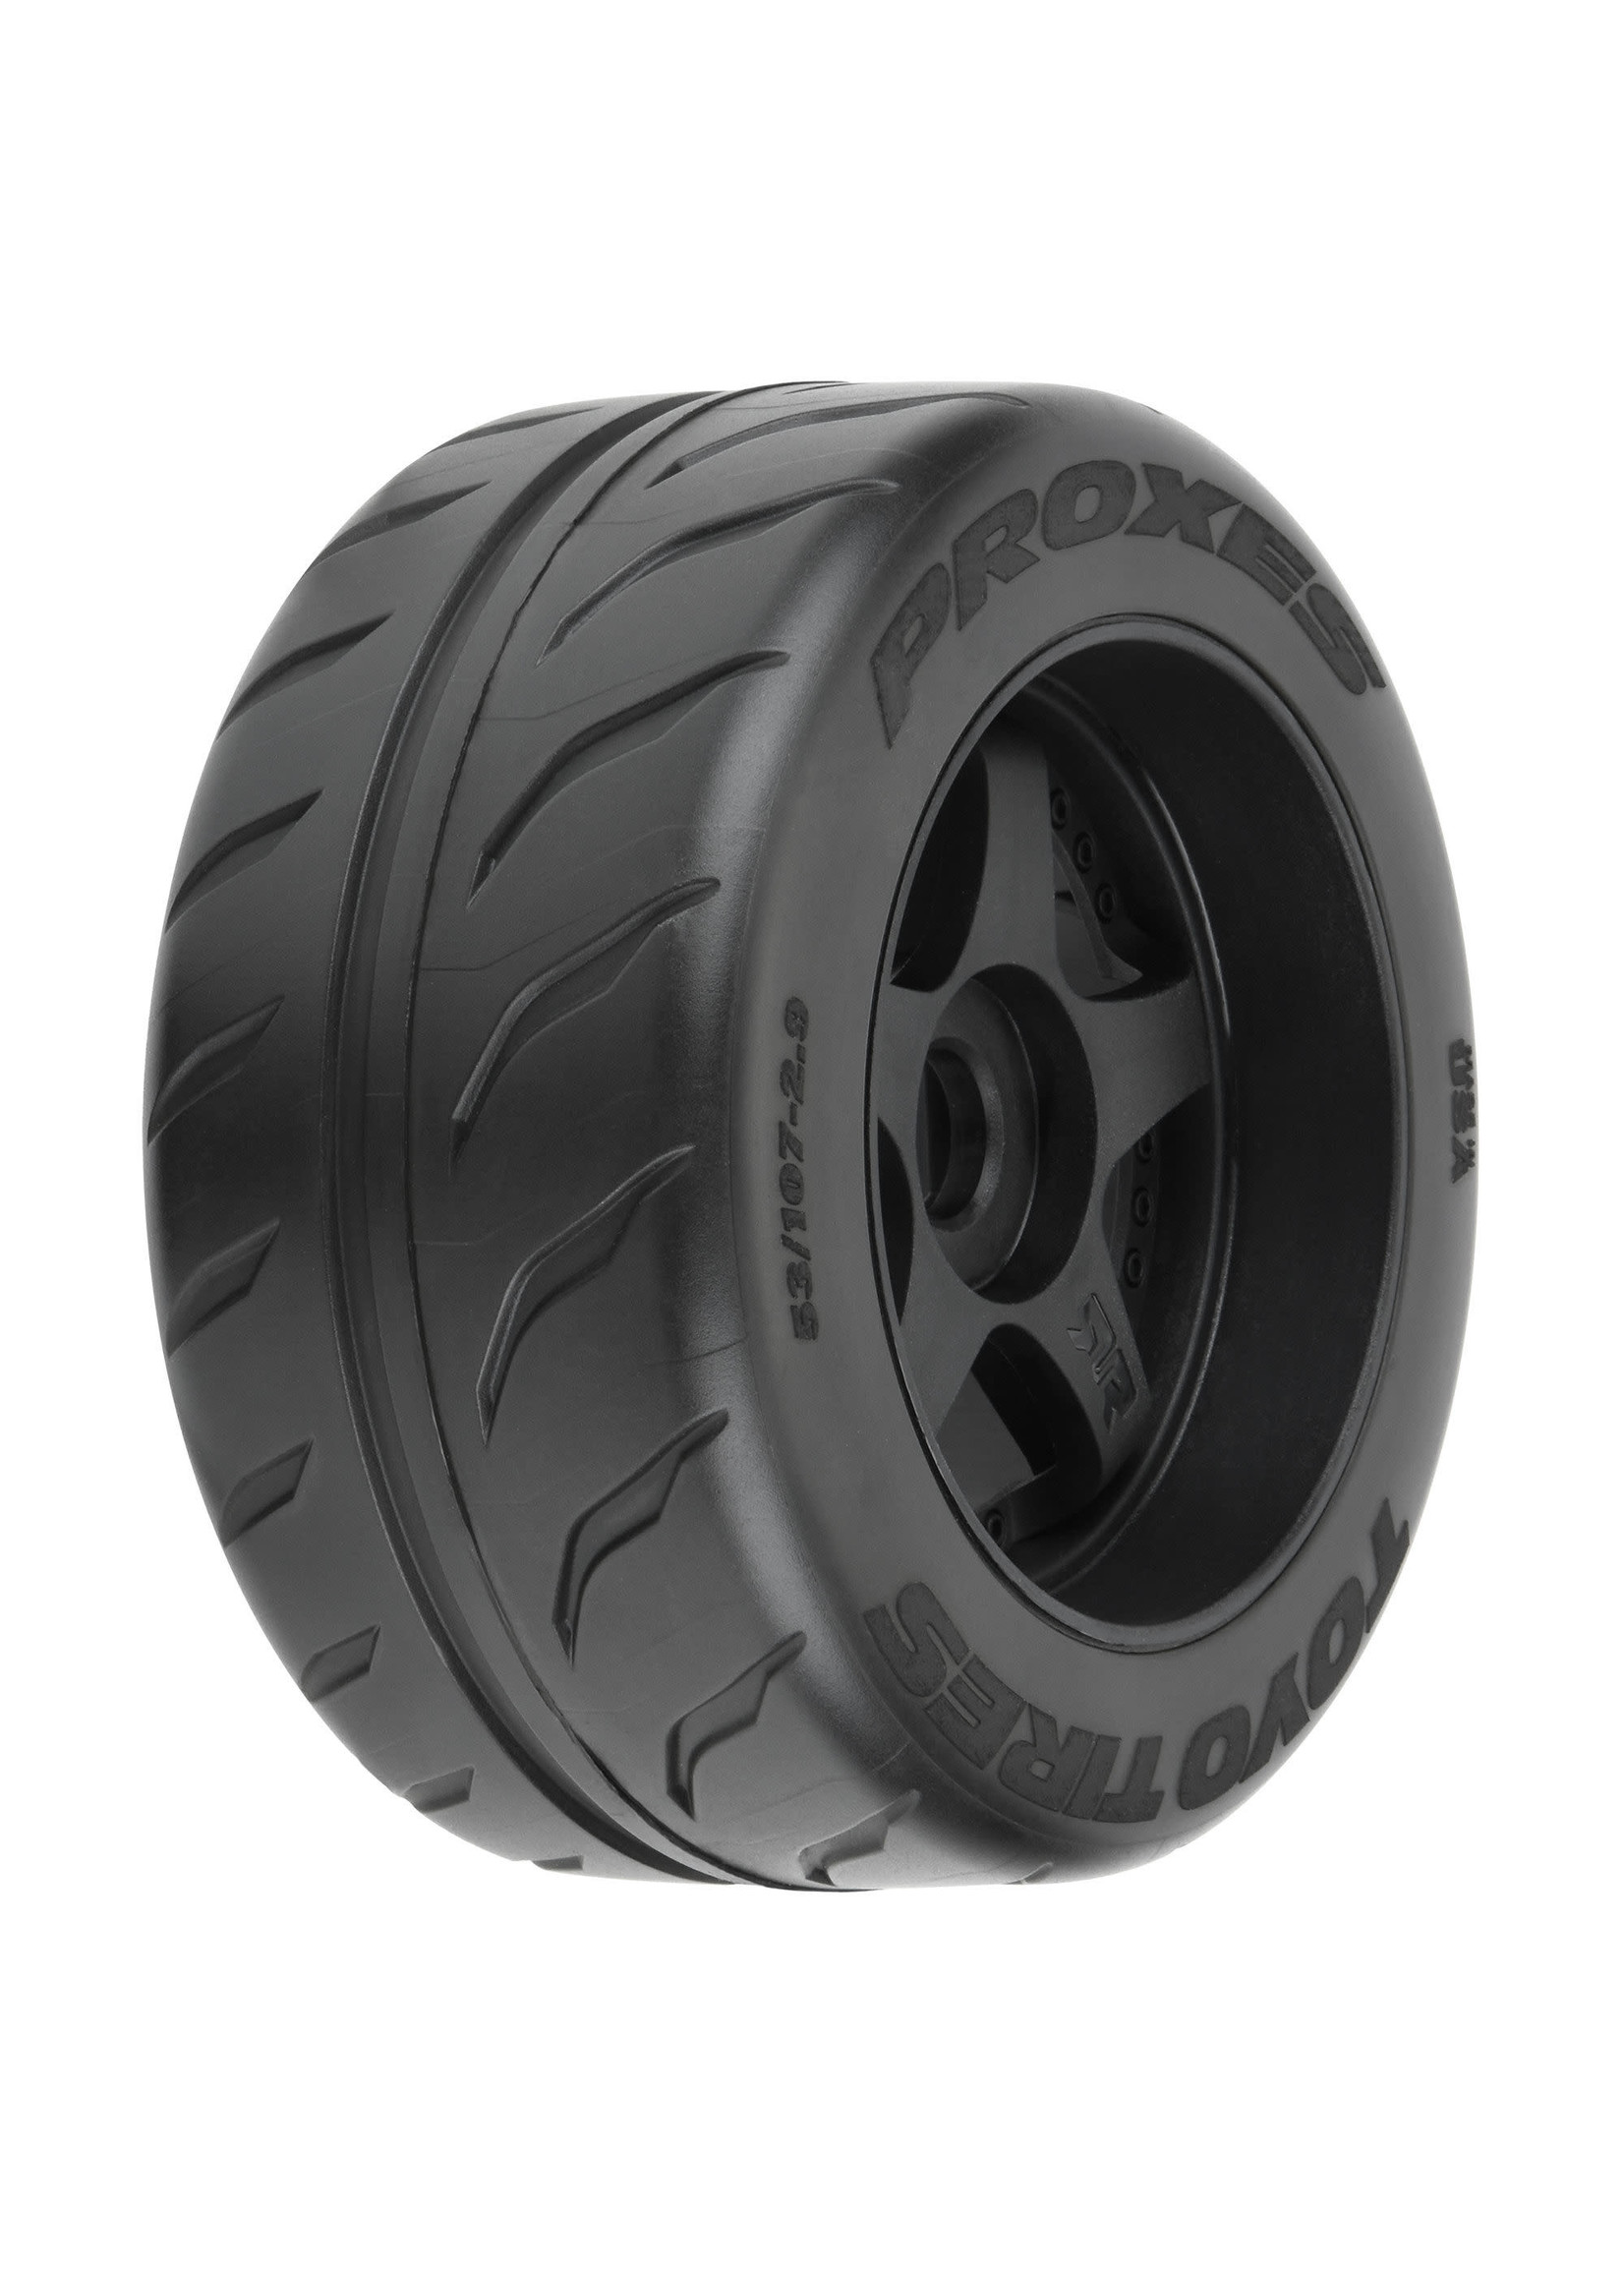 Pro-Line Racing PRO1020010 Pro-Line 1/7 Toyo Proxes R888R S3 Rear 53/107 2.9" BELTED Mounted 17mm 5-Spoke (2)